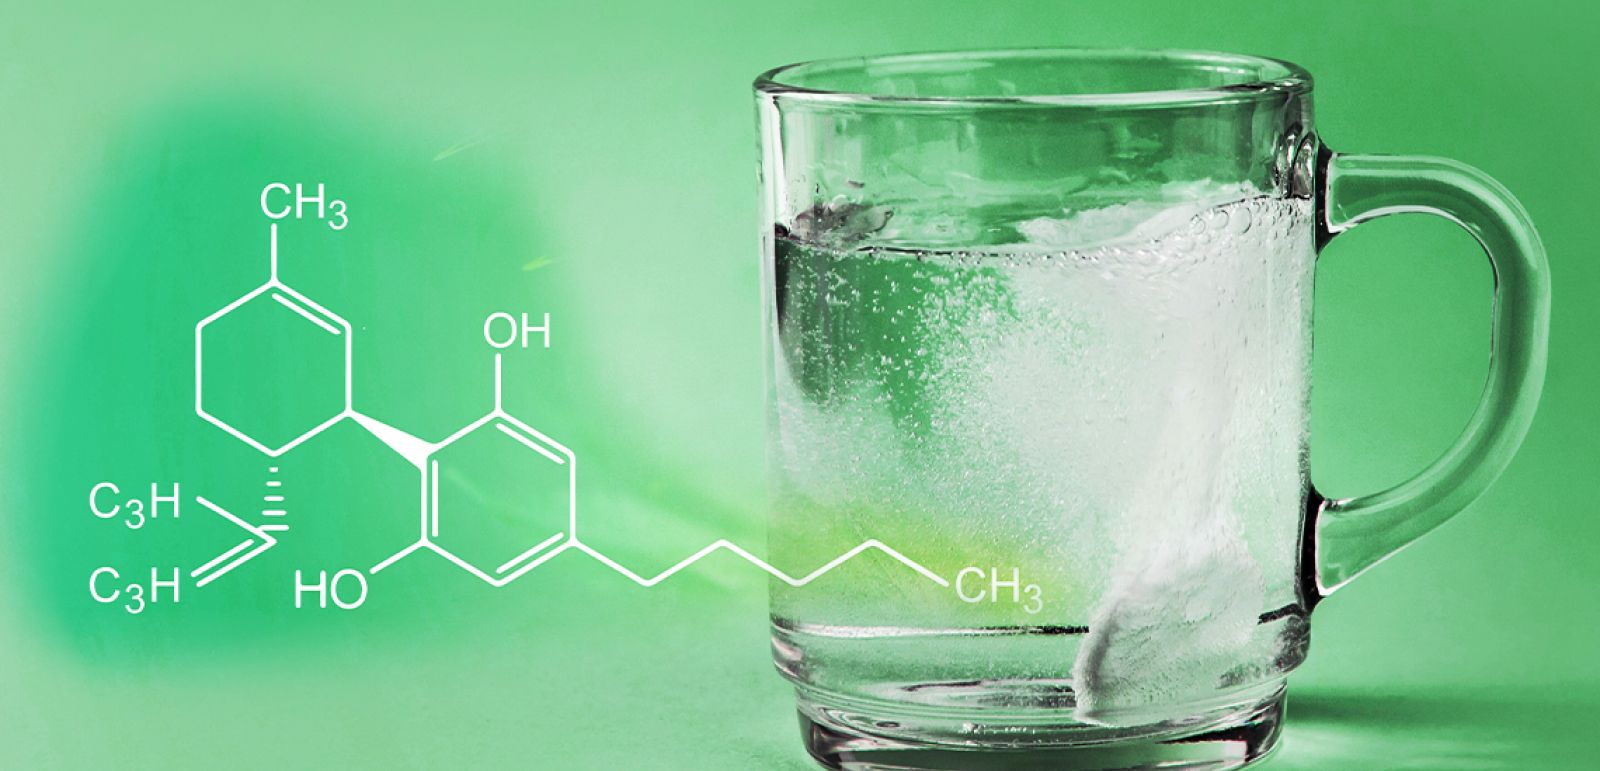 Photo for: Water-Soluble CBD: Why it impacts infused beverage industry so much